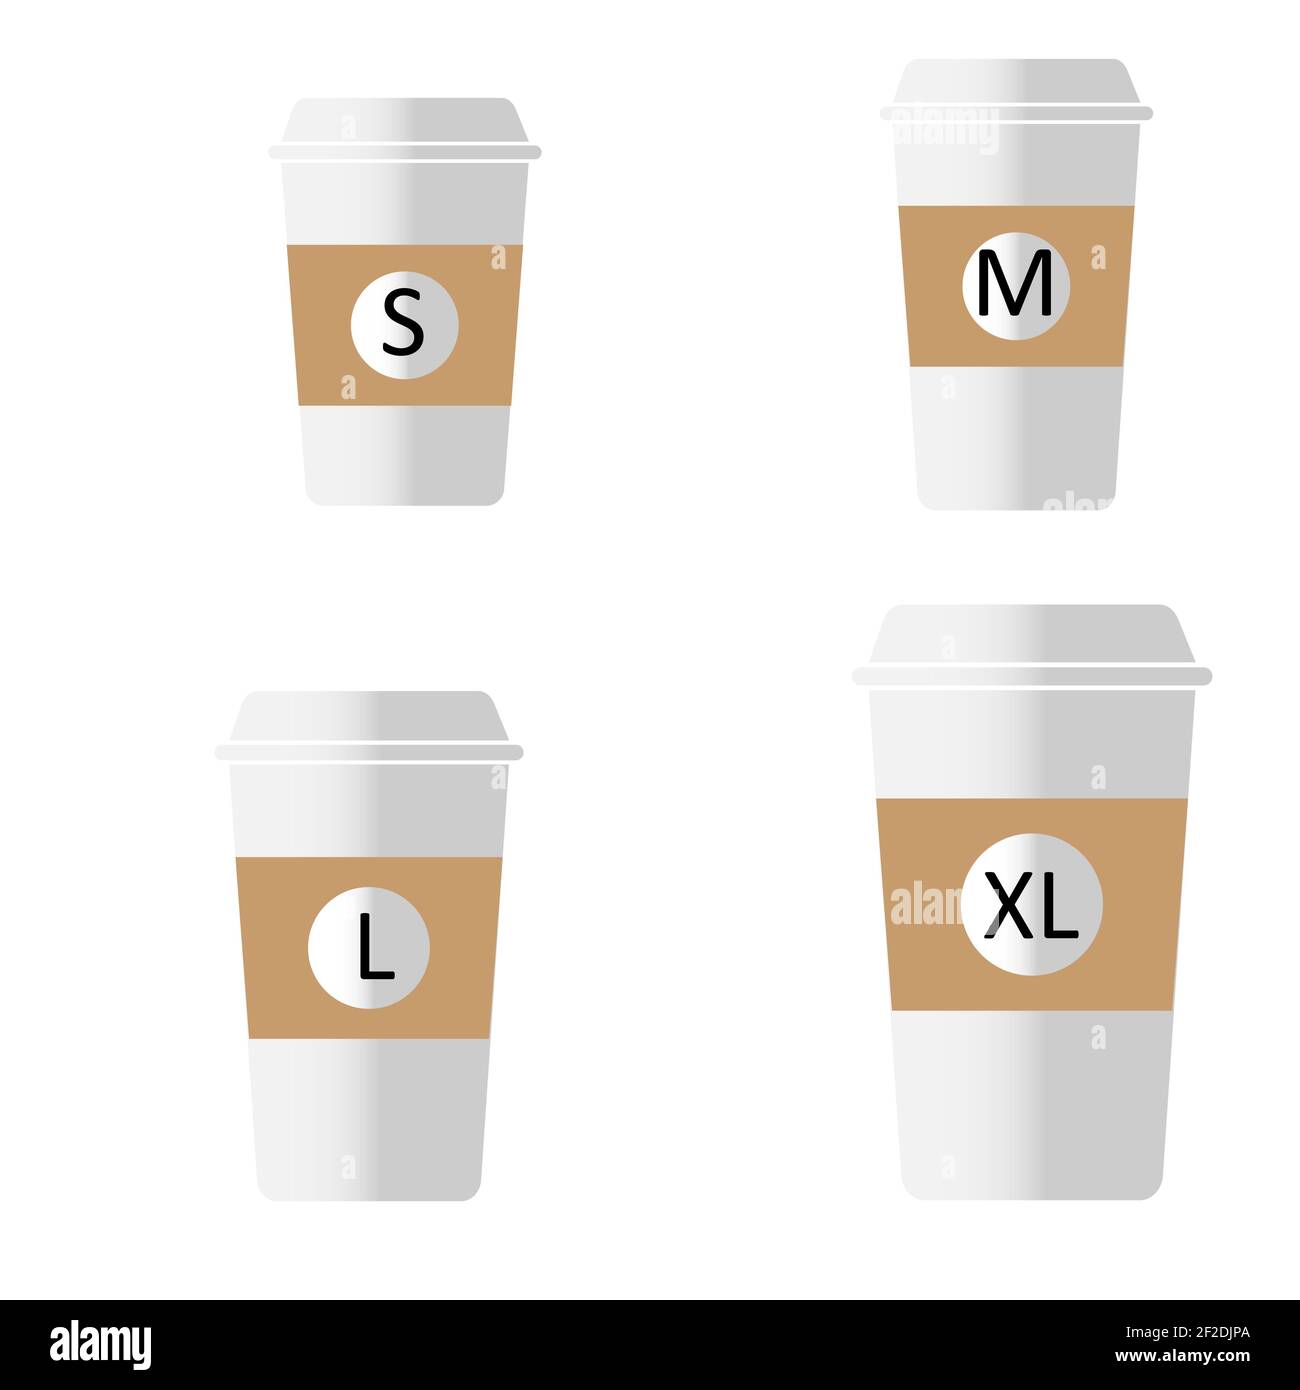 https://c8.alamy.com/comp/2F2DJPA/coffee-to-go-different-sizes-sign-flat-style-coffee-cup-size-s-m-l-xl-icons-on-white-background-take-away-hot-cup-sizes-symbol-different-size-sm-2F2DJPA.jpg